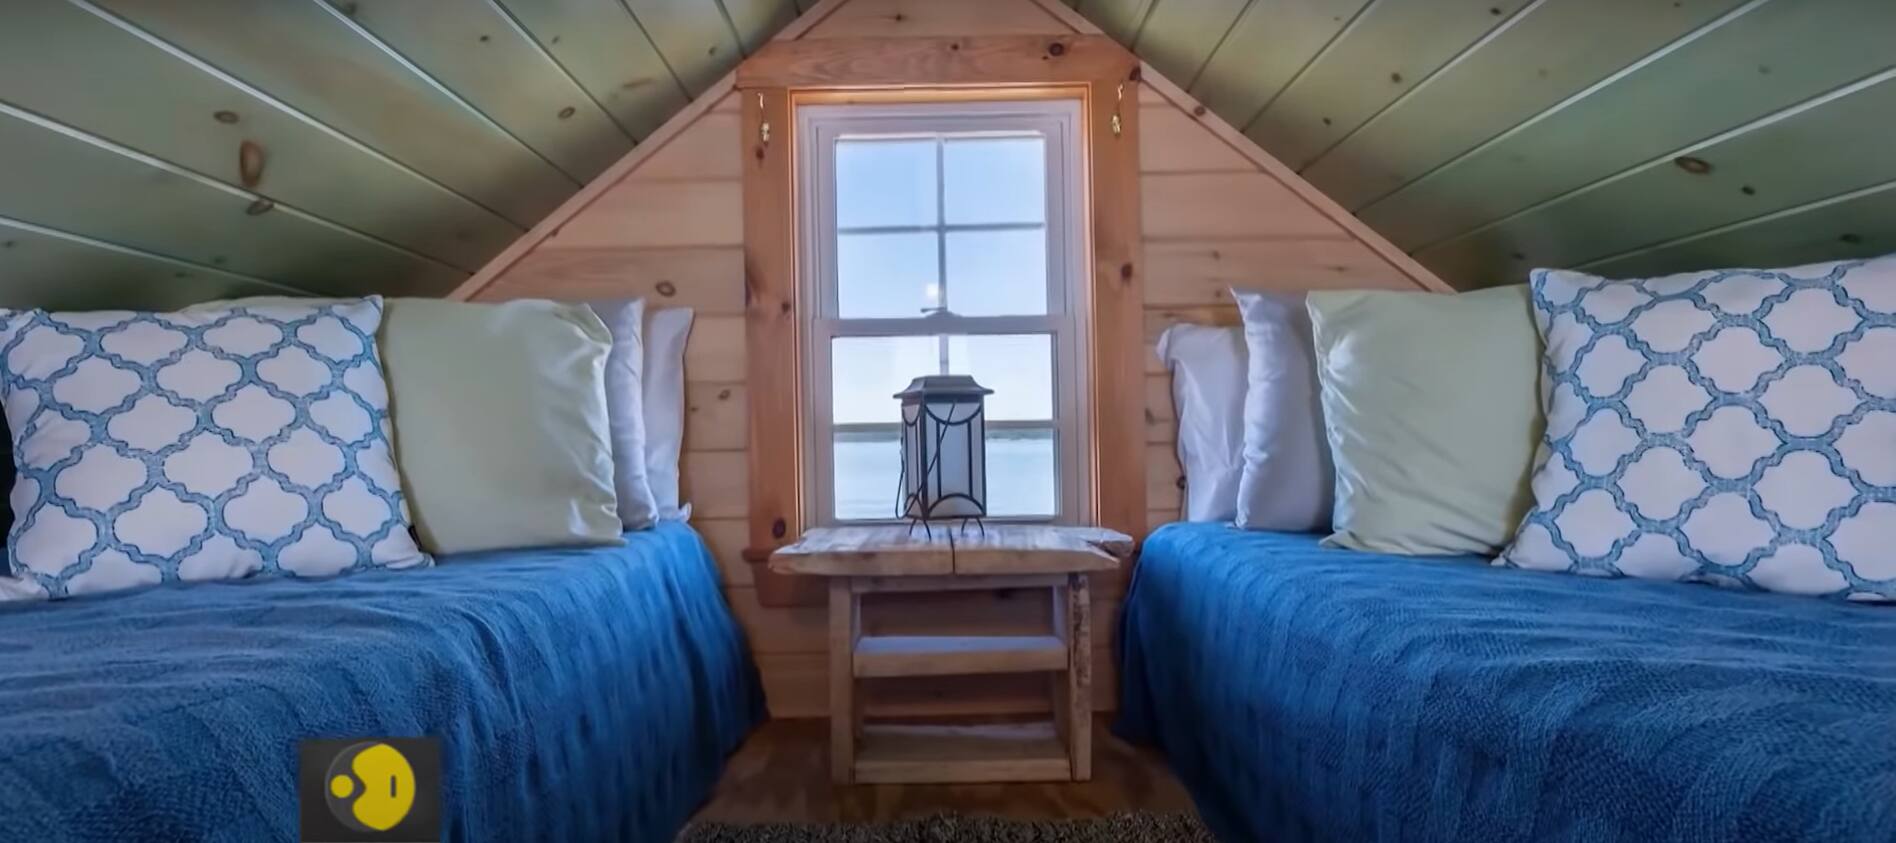 Check out the small bedroom of this cottage house